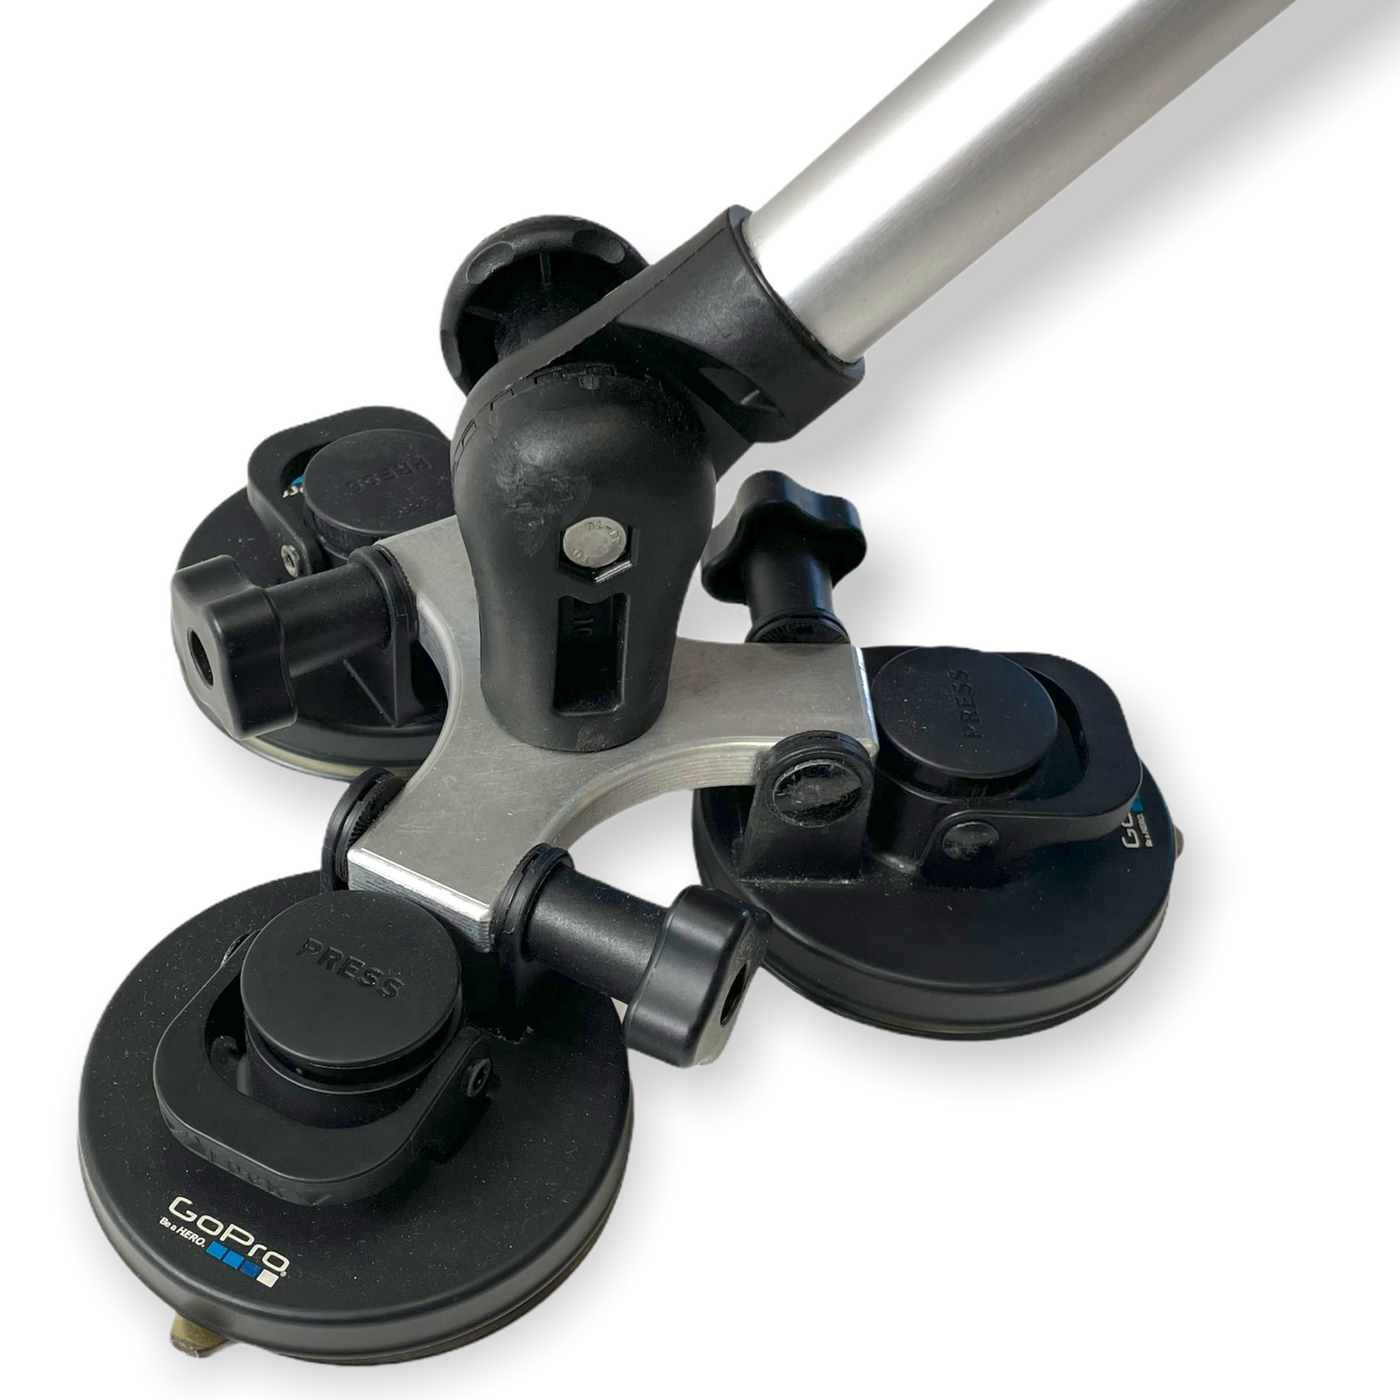 SailVideoSystem Pro Suction Mount for 360 cams